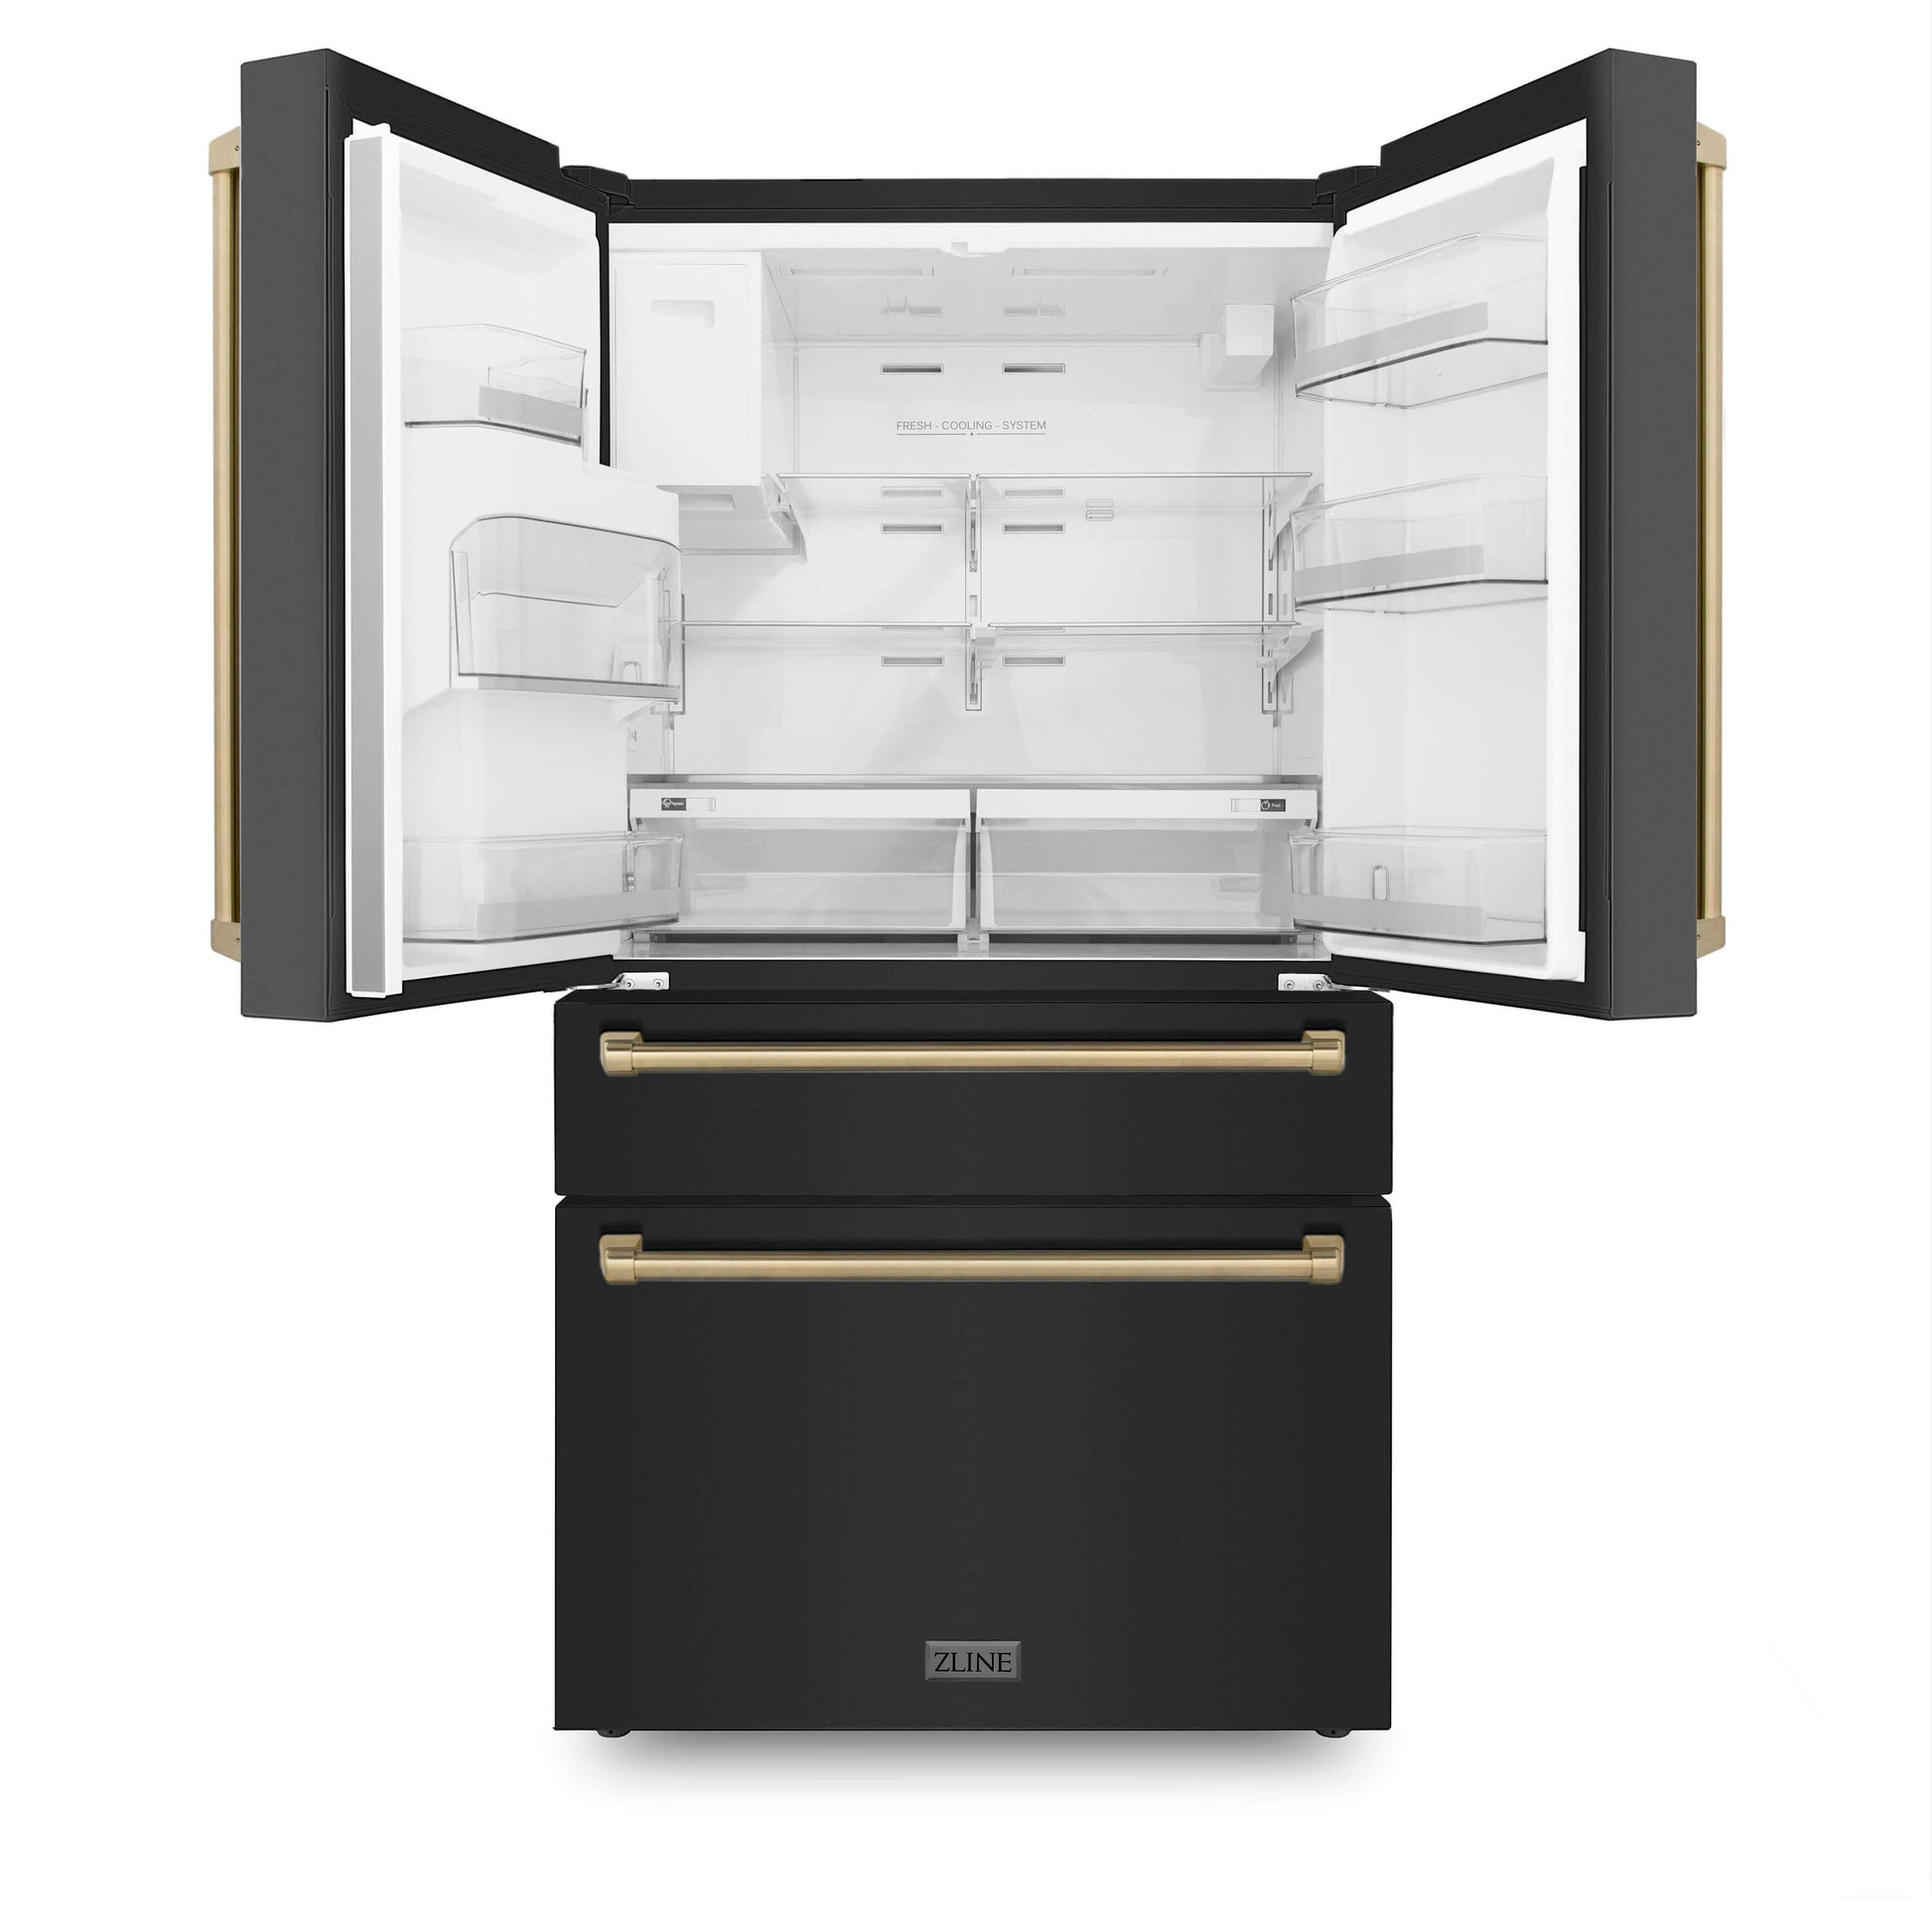 ZLINE Autograph Edition 36 in. 21.6 cu. ft Freestanding French Door Refrigerator with Water and Ice Dispenser in Fingerprint Resistant Black Stainless Steel with Champagne Bronze Accents (RFMZ-W-36-BS-CB) front, doors open.